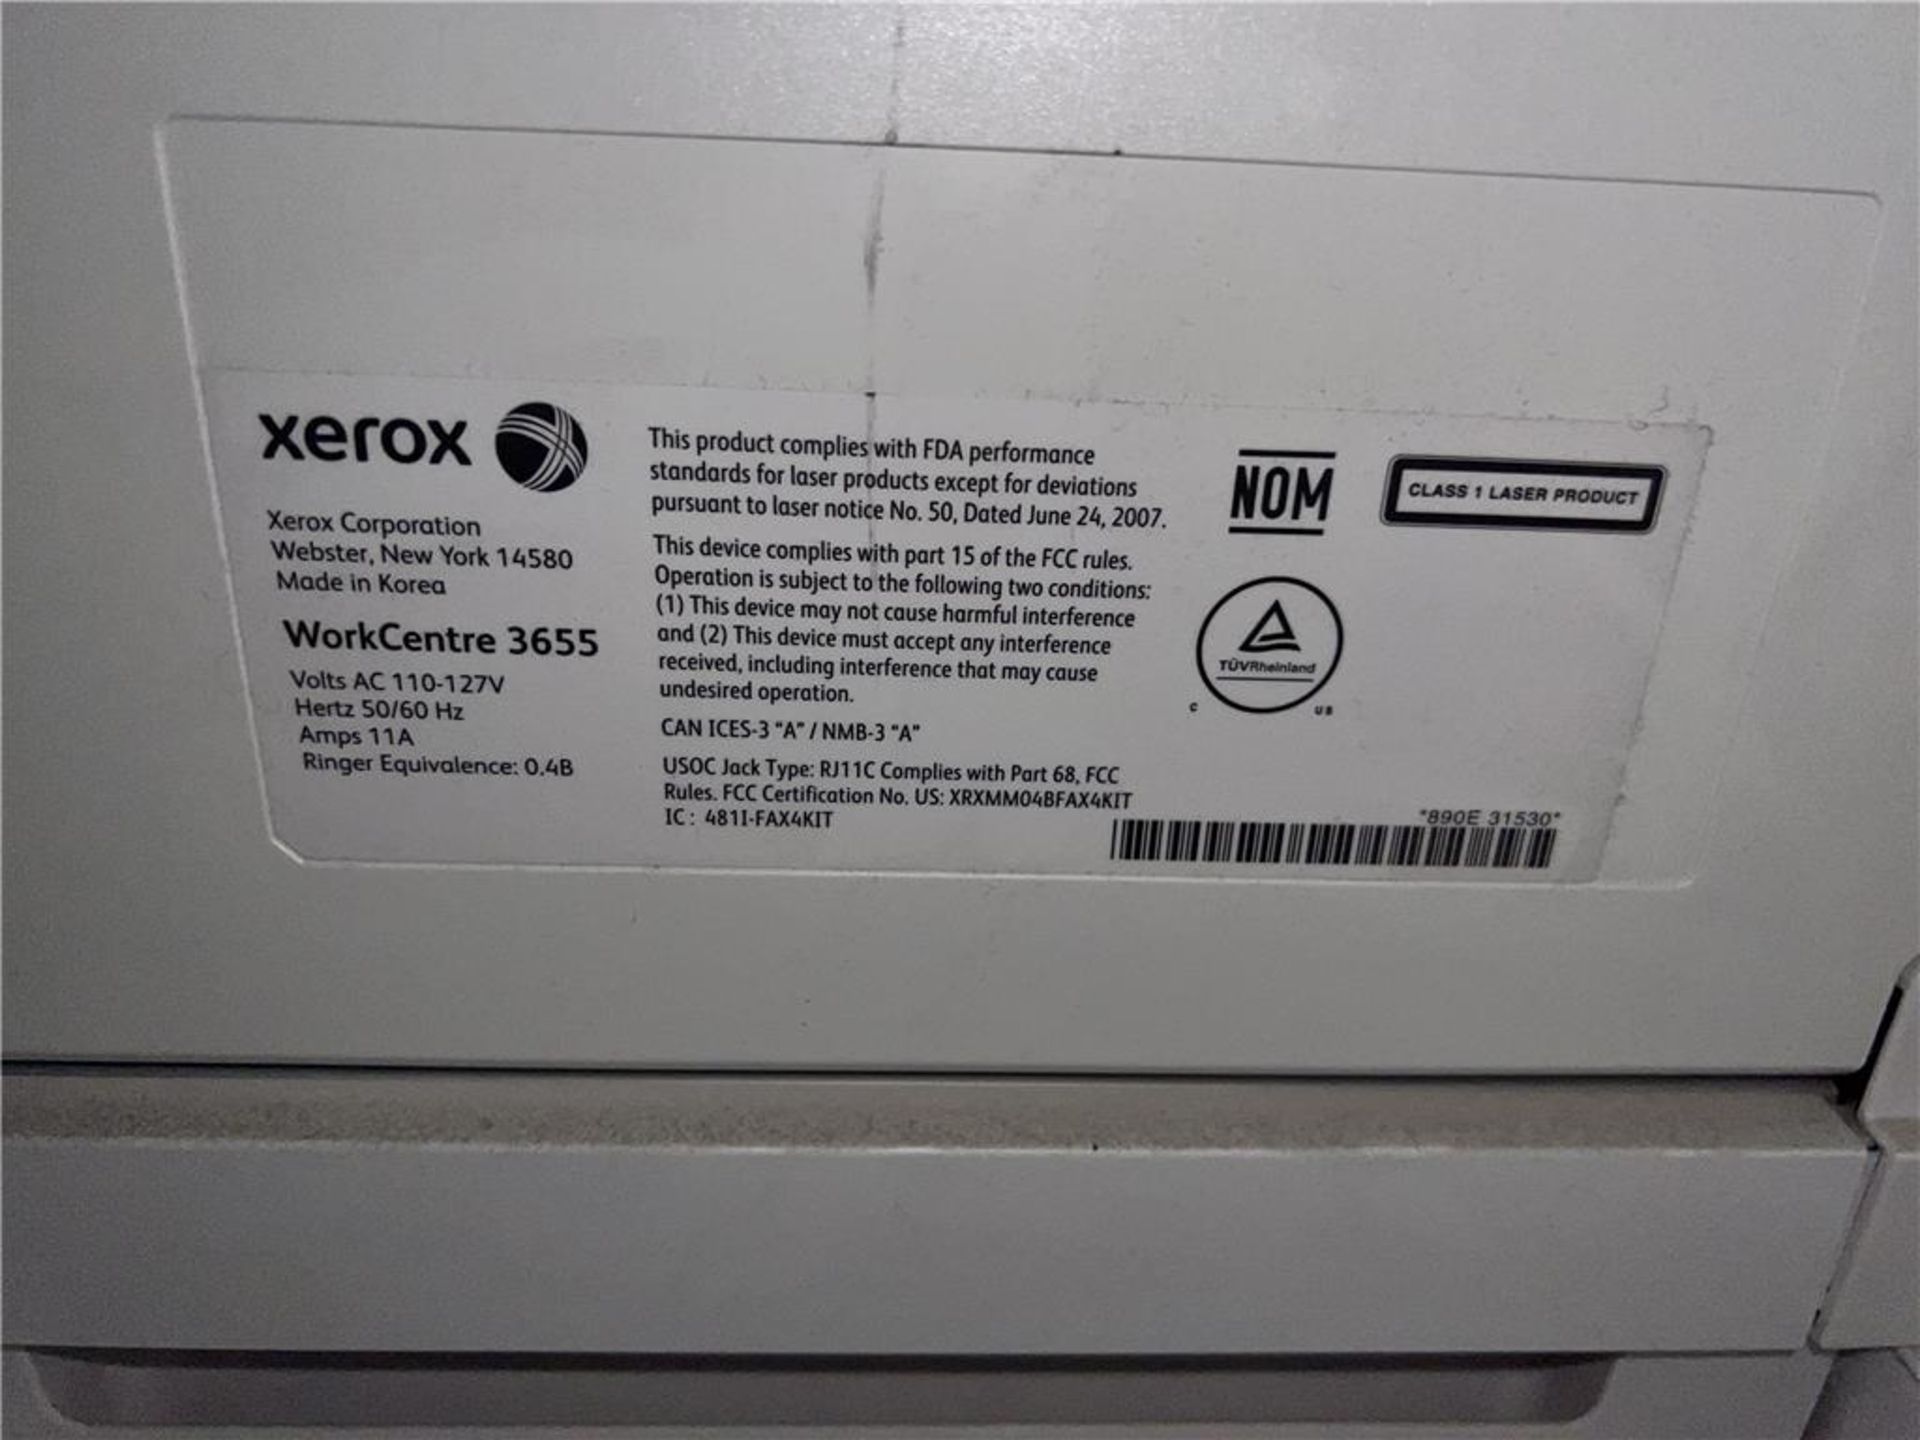 XEROX WORKCENTRE 3655 MULTIFUNCTION LASER PRINTER, 57,941 TOTAL IMPRESSIONS - Image 3 of 3